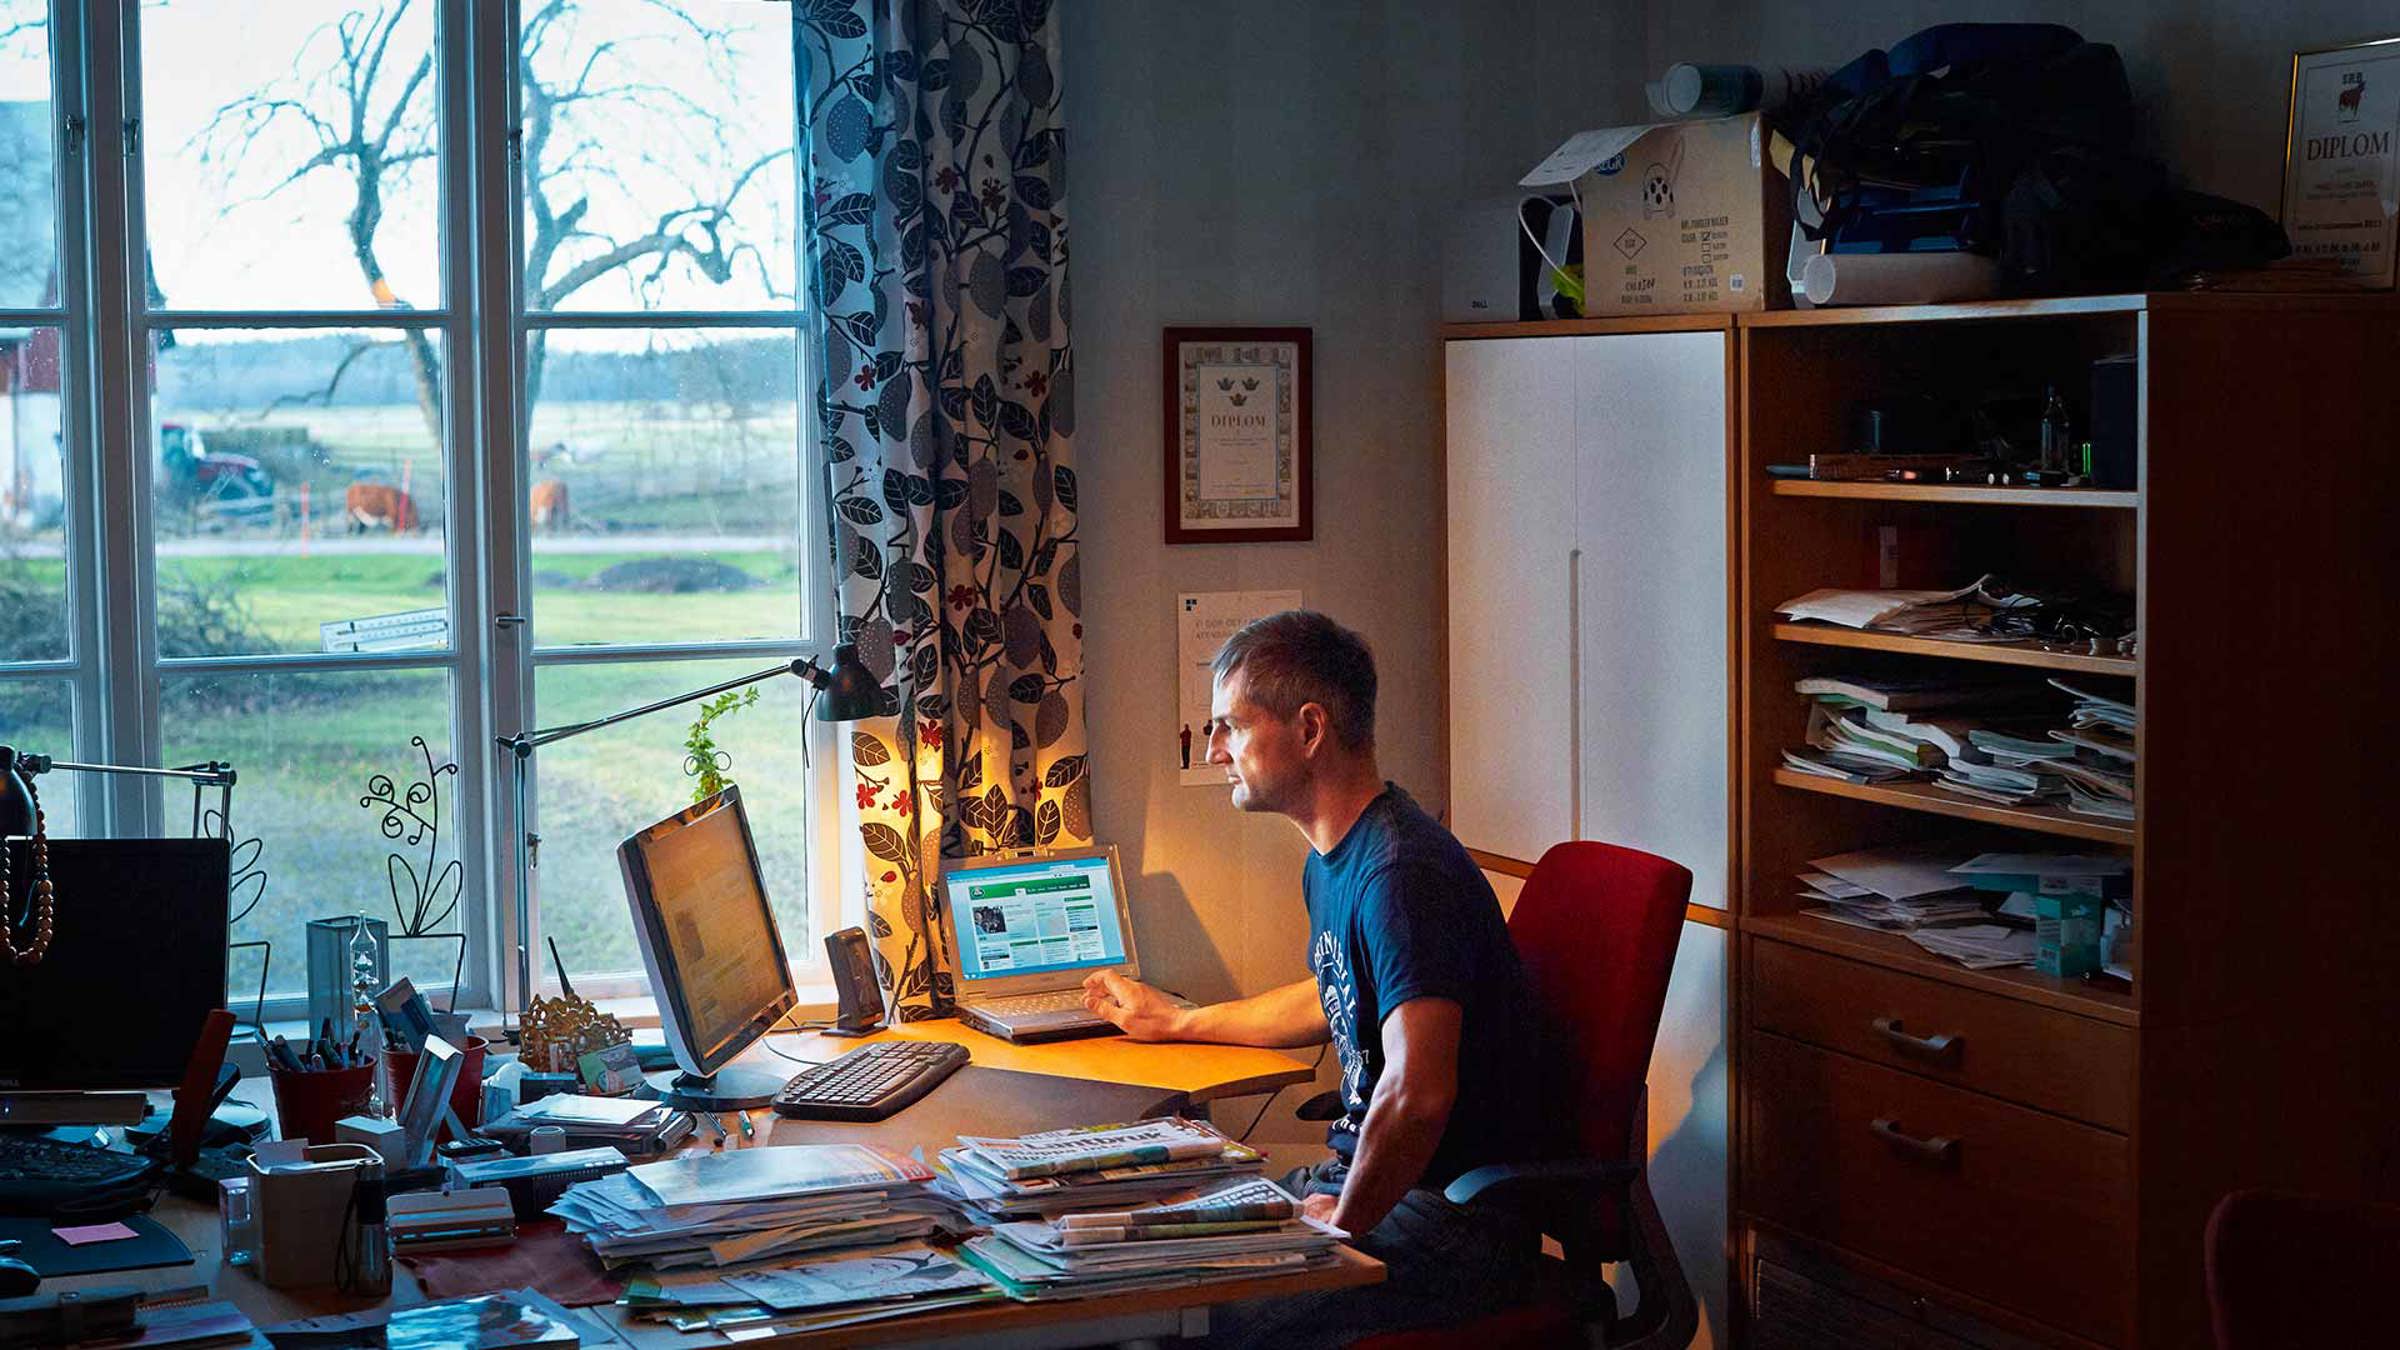 Farmer using a computer sat at a desk in his home office